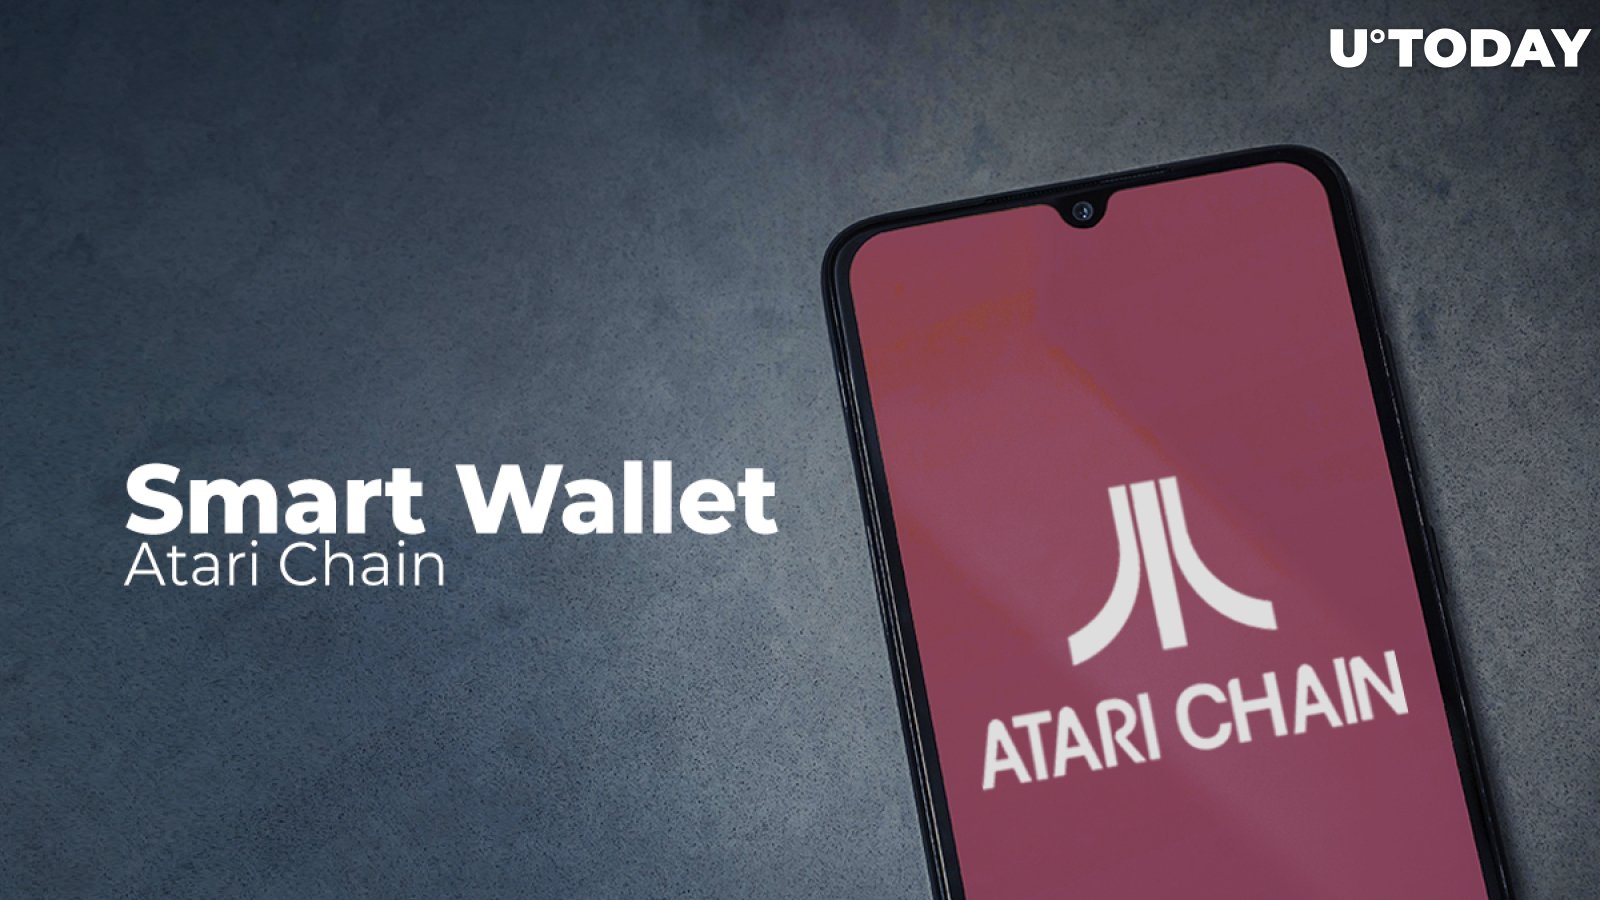 The Launch Of Smart Wallet Makes Atari Chain One Step Ahead